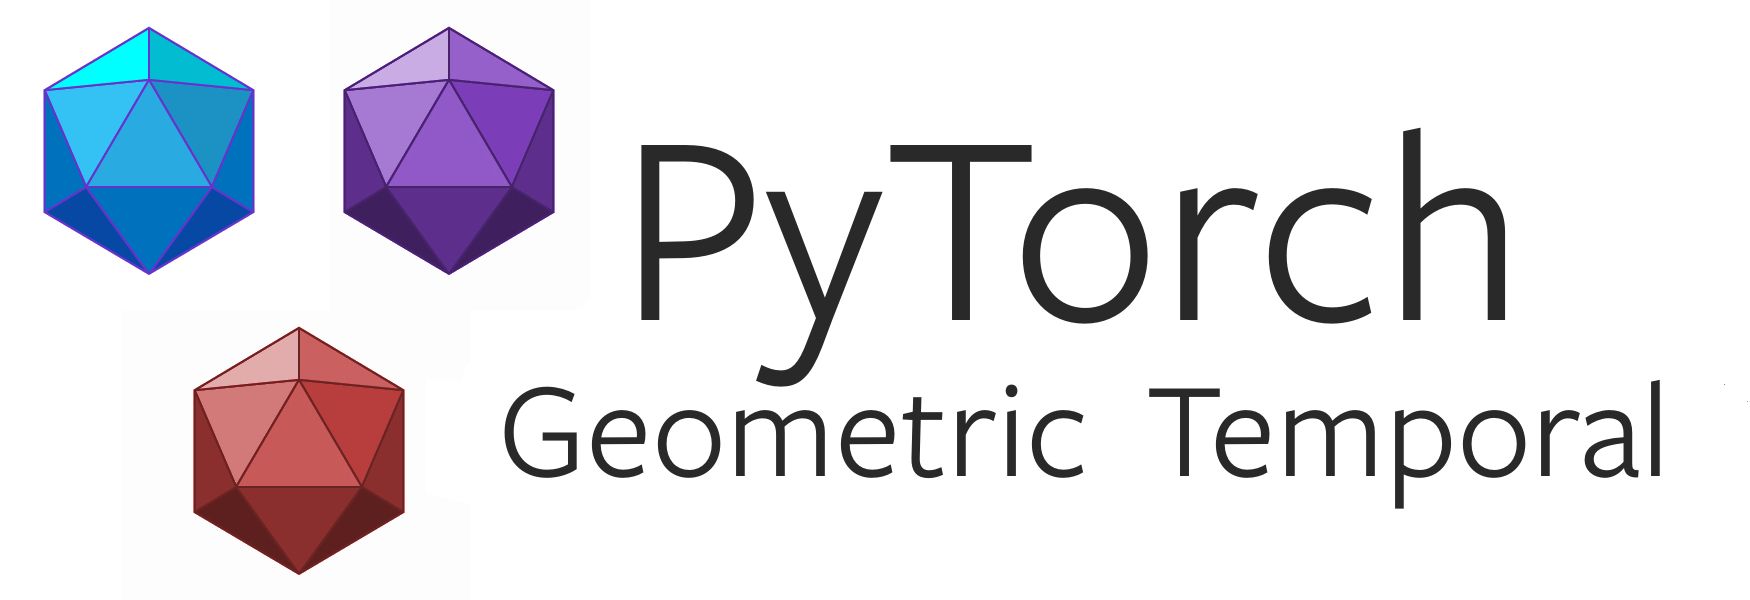 featured image - Machine-Learning Neural Spatiotemporal Signal Processing with PyTorch Geometric Temporal